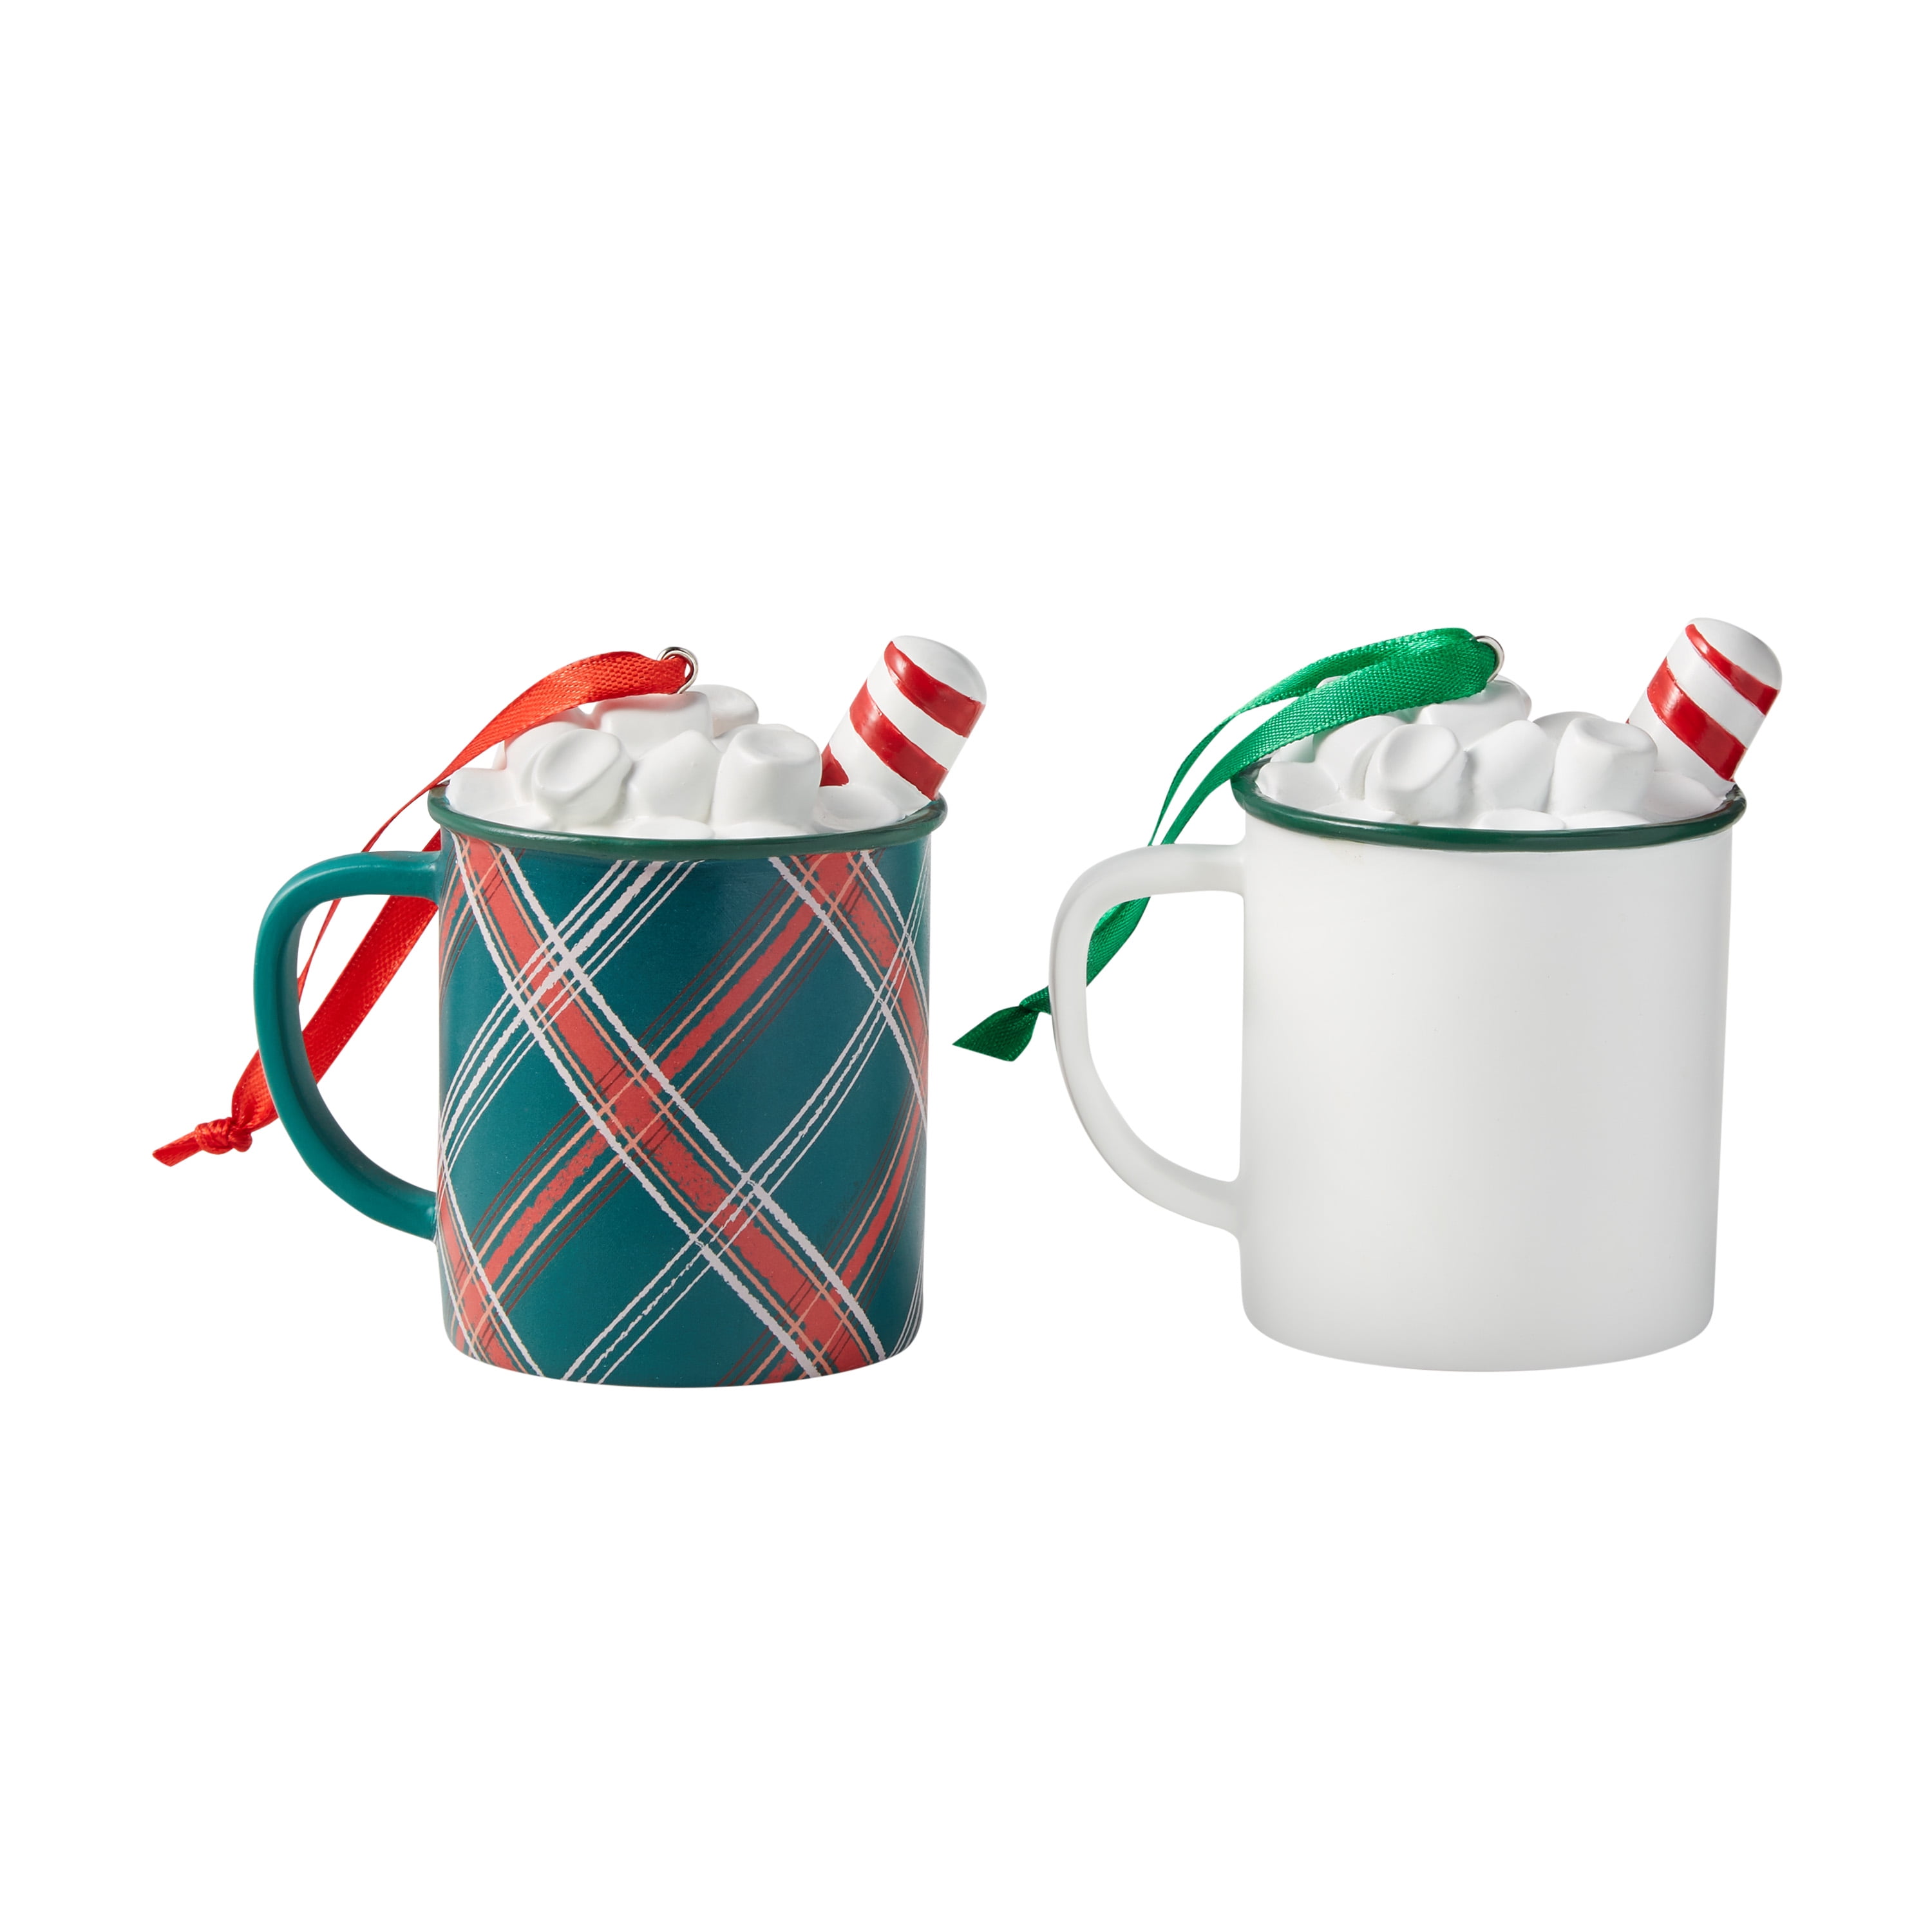 Scentsy Melt My Heart Warmer - Plaid Cup holiday warmer